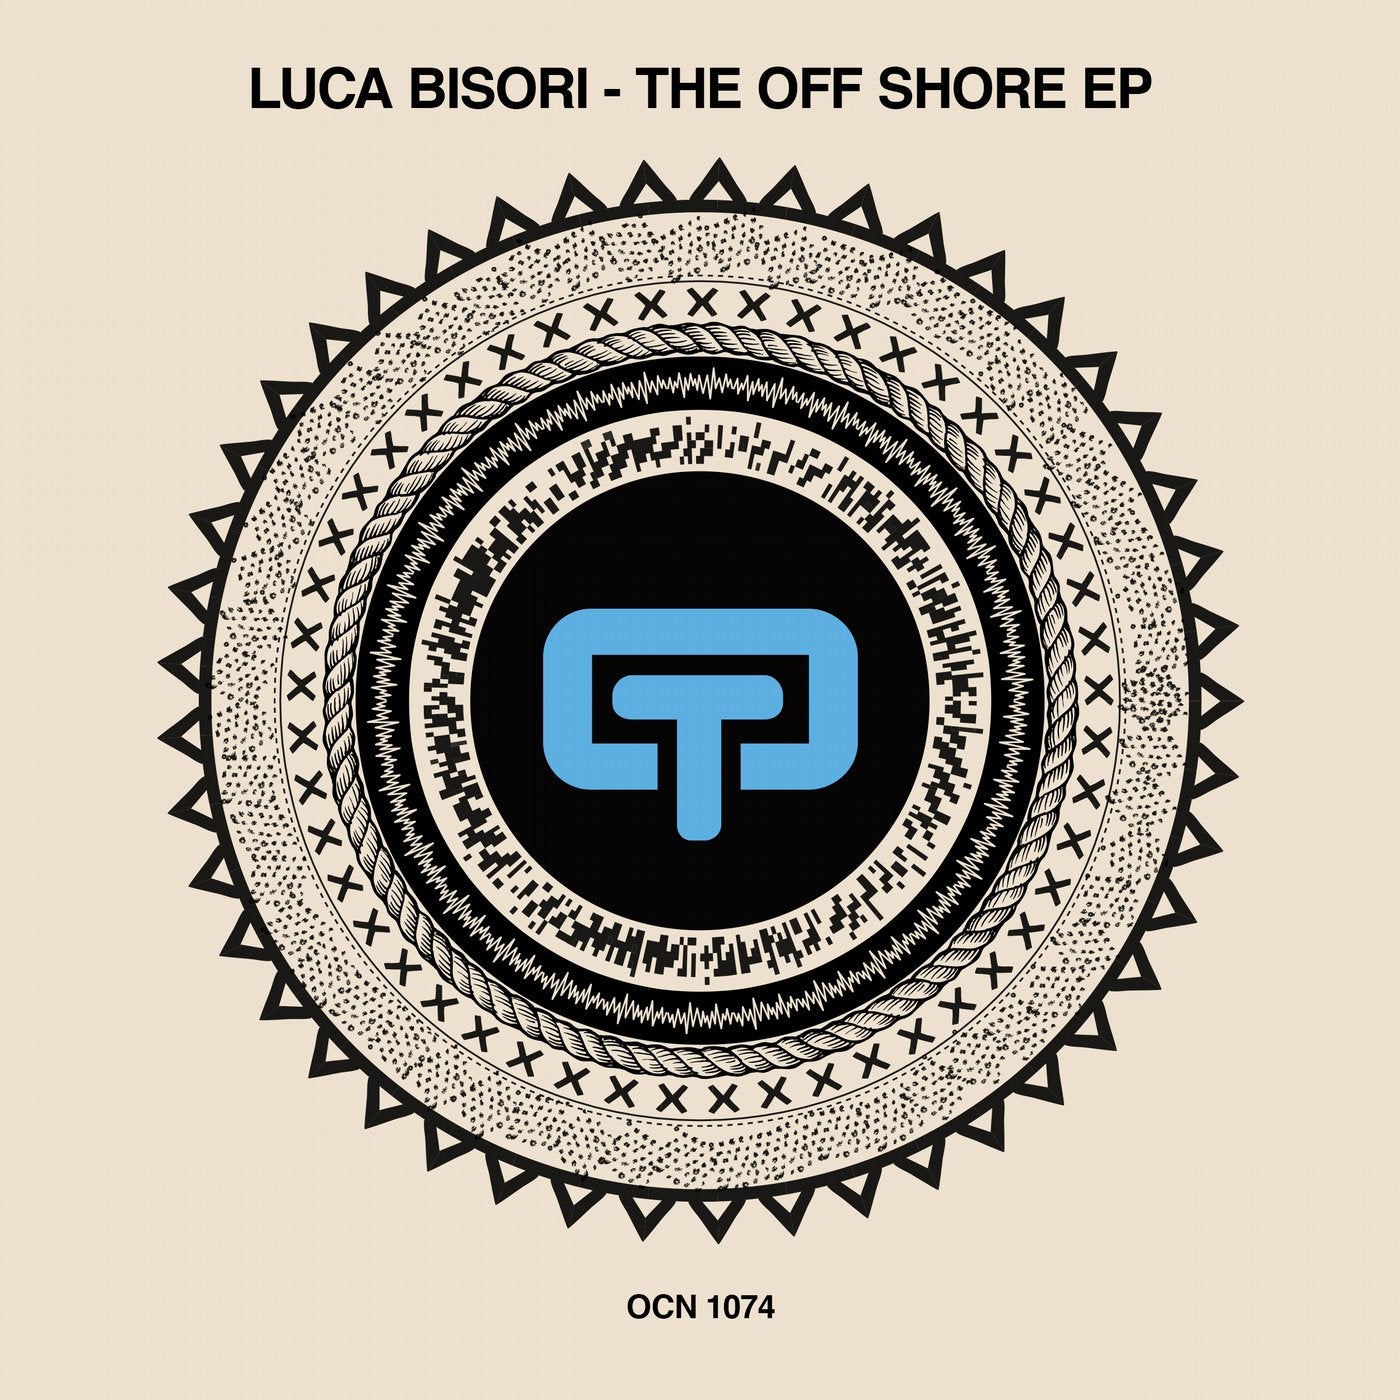 The Off Shore EP